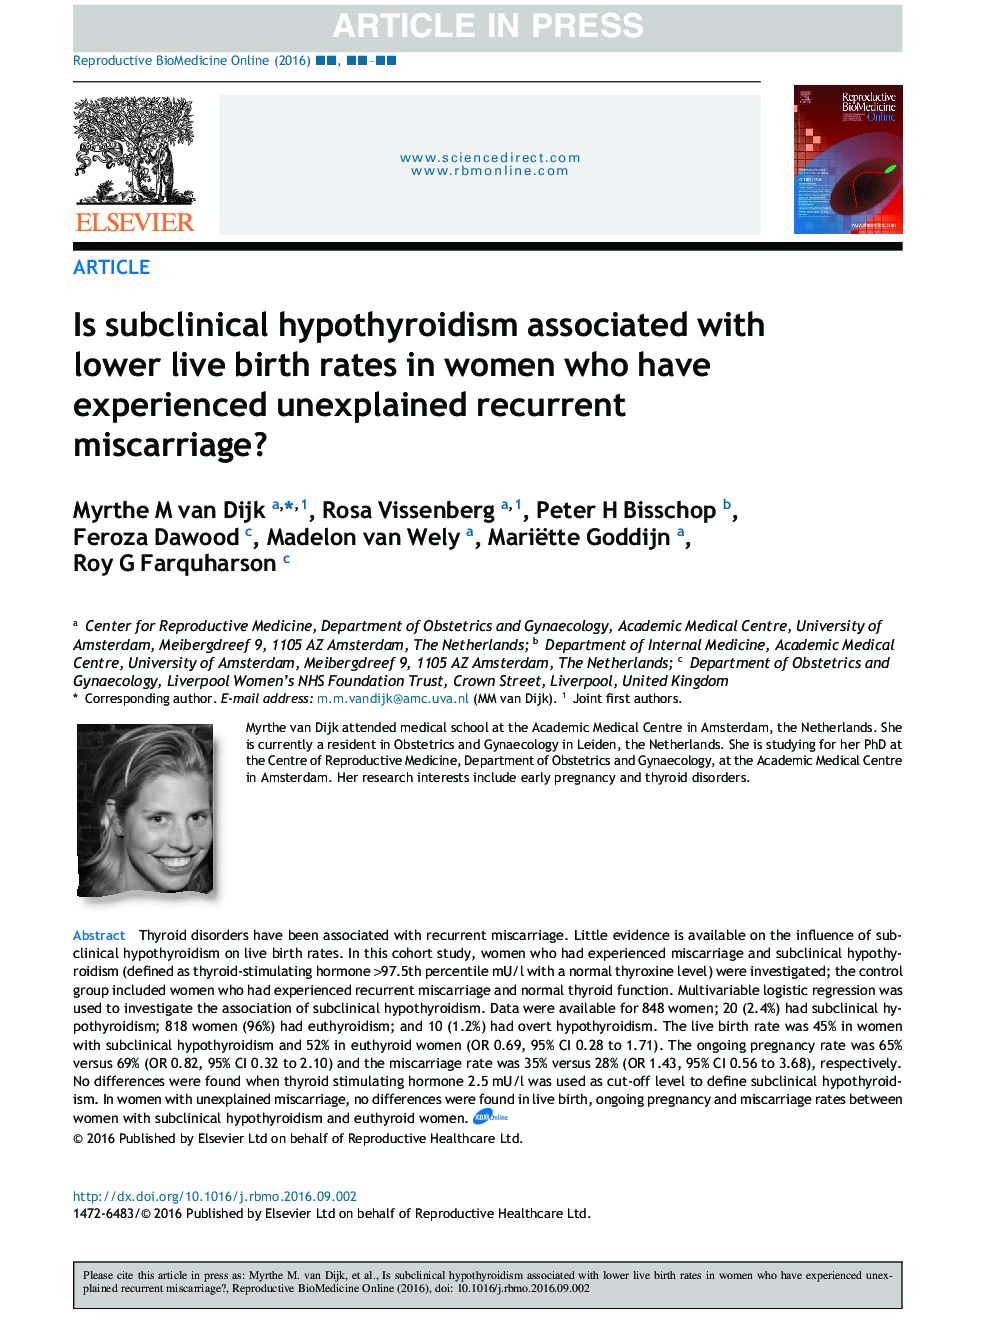 Is subclinical hypothyroidism associated with lower live birth rates in women who have experienced unexplained recurrent miscarriage?